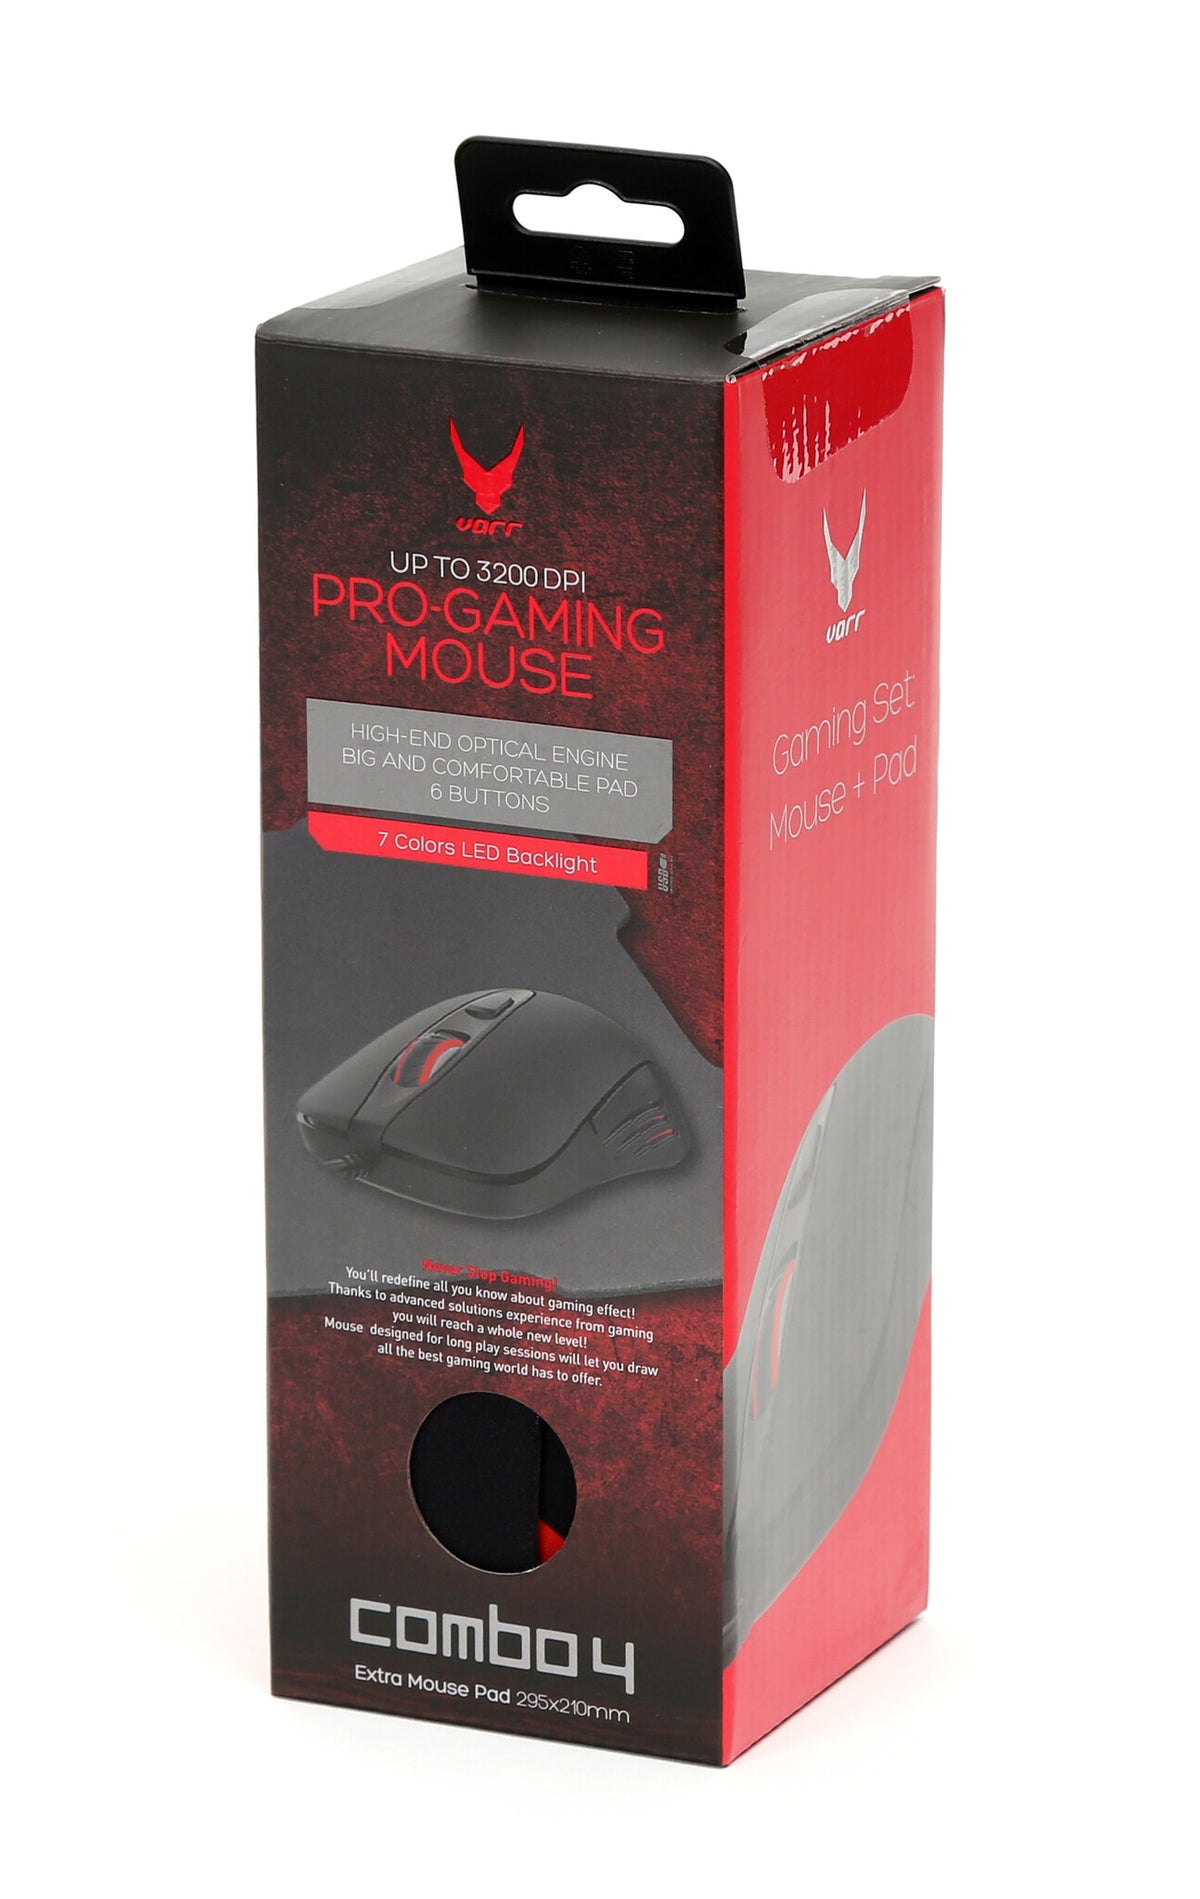 Varr VSETMPX5 Gaming Mouse and Mousepad Set - Wired USB-A Optical Backlit Mouse in Black - 3,200 DPI